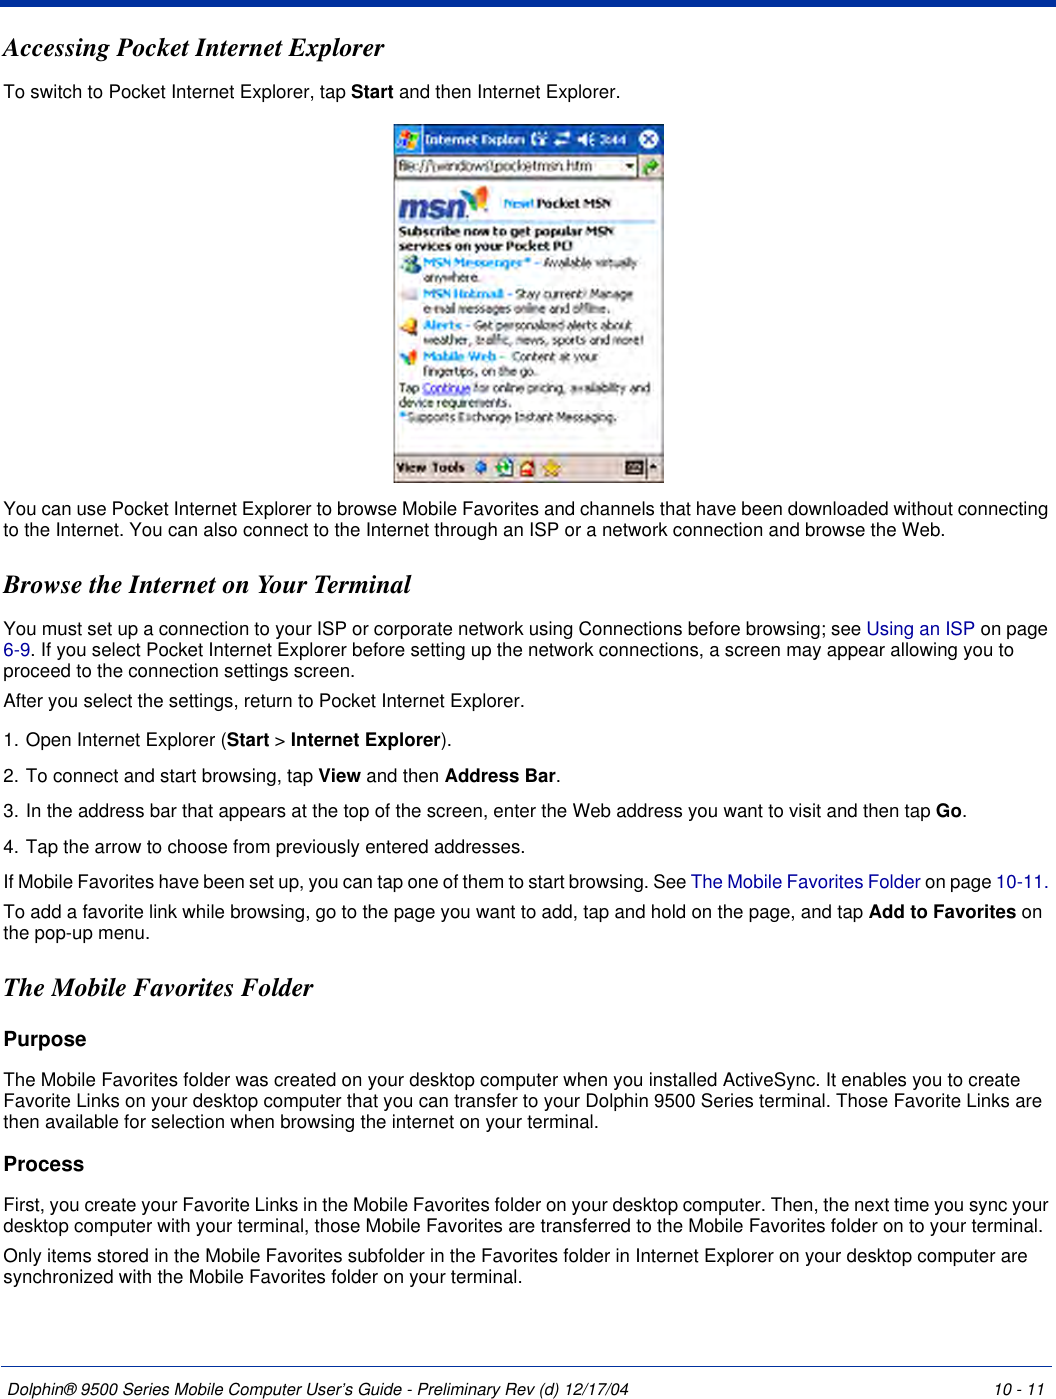 Dolphin® 9500 Series Mobile Computer User’s Guide - Preliminary Rev (d) 12/17/04 10 - 11Accessing Pocket Internet ExplorerTo switch to Pocket Internet Explorer, tap Start and then Internet Explorer.You can use Pocket Internet Explorer to browse Mobile Favorites and channels that have been downloaded without connecting to the Internet. You can also connect to the Internet through an ISP or a network connection and browse the Web.Browse the Internet on Your TerminalYou must set up a connection to your ISP or corporate network using Connections before browsing; see Using an ISP on page 6-9. If you select Pocket Internet Explorer before setting up the network connections, a screen may appear allowing you to proceed to the connection settings screen. After you select the settings, return to Pocket Internet Explorer. 1. Open Internet Explorer (Start &gt; Internet Explorer).2. To connect and start browsing, tap View and then Address Bar. 3. In the address bar that appears at the top of the screen, enter the Web address you want to visit and then tap Go. 4. Tap the arrow to choose from previously entered addresses.If Mobile Favorites have been set up, you can tap one of them to start browsing. See The Mobile Favorites Folder on page 10-11. To add a favorite link while browsing, go to the page you want to add, tap and hold on the page, and tap Add to Favorites on the pop-up menu.The Mobile Favorites FolderPurposeThe Mobile Favorites folder was created on your desktop computer when you installed ActiveSync. It enables you to create Favorite Links on your desktop computer that you can transfer to your Dolphin 9500 Series terminal. Those Favorite Links are then available for selection when browsing the internet on your terminal. ProcessFirst, you create your Favorite Links in the Mobile Favorites folder on your desktop computer. Then, the next time you sync your desktop computer with your terminal, those Mobile Favorites are transferred to the Mobile Favorites folder on to your terminal. Only items stored in the Mobile Favorites subfolder in the Favorites folder in Internet Explorer on your desktop computer are synchronized with the Mobile Favorites folder on your terminal. 